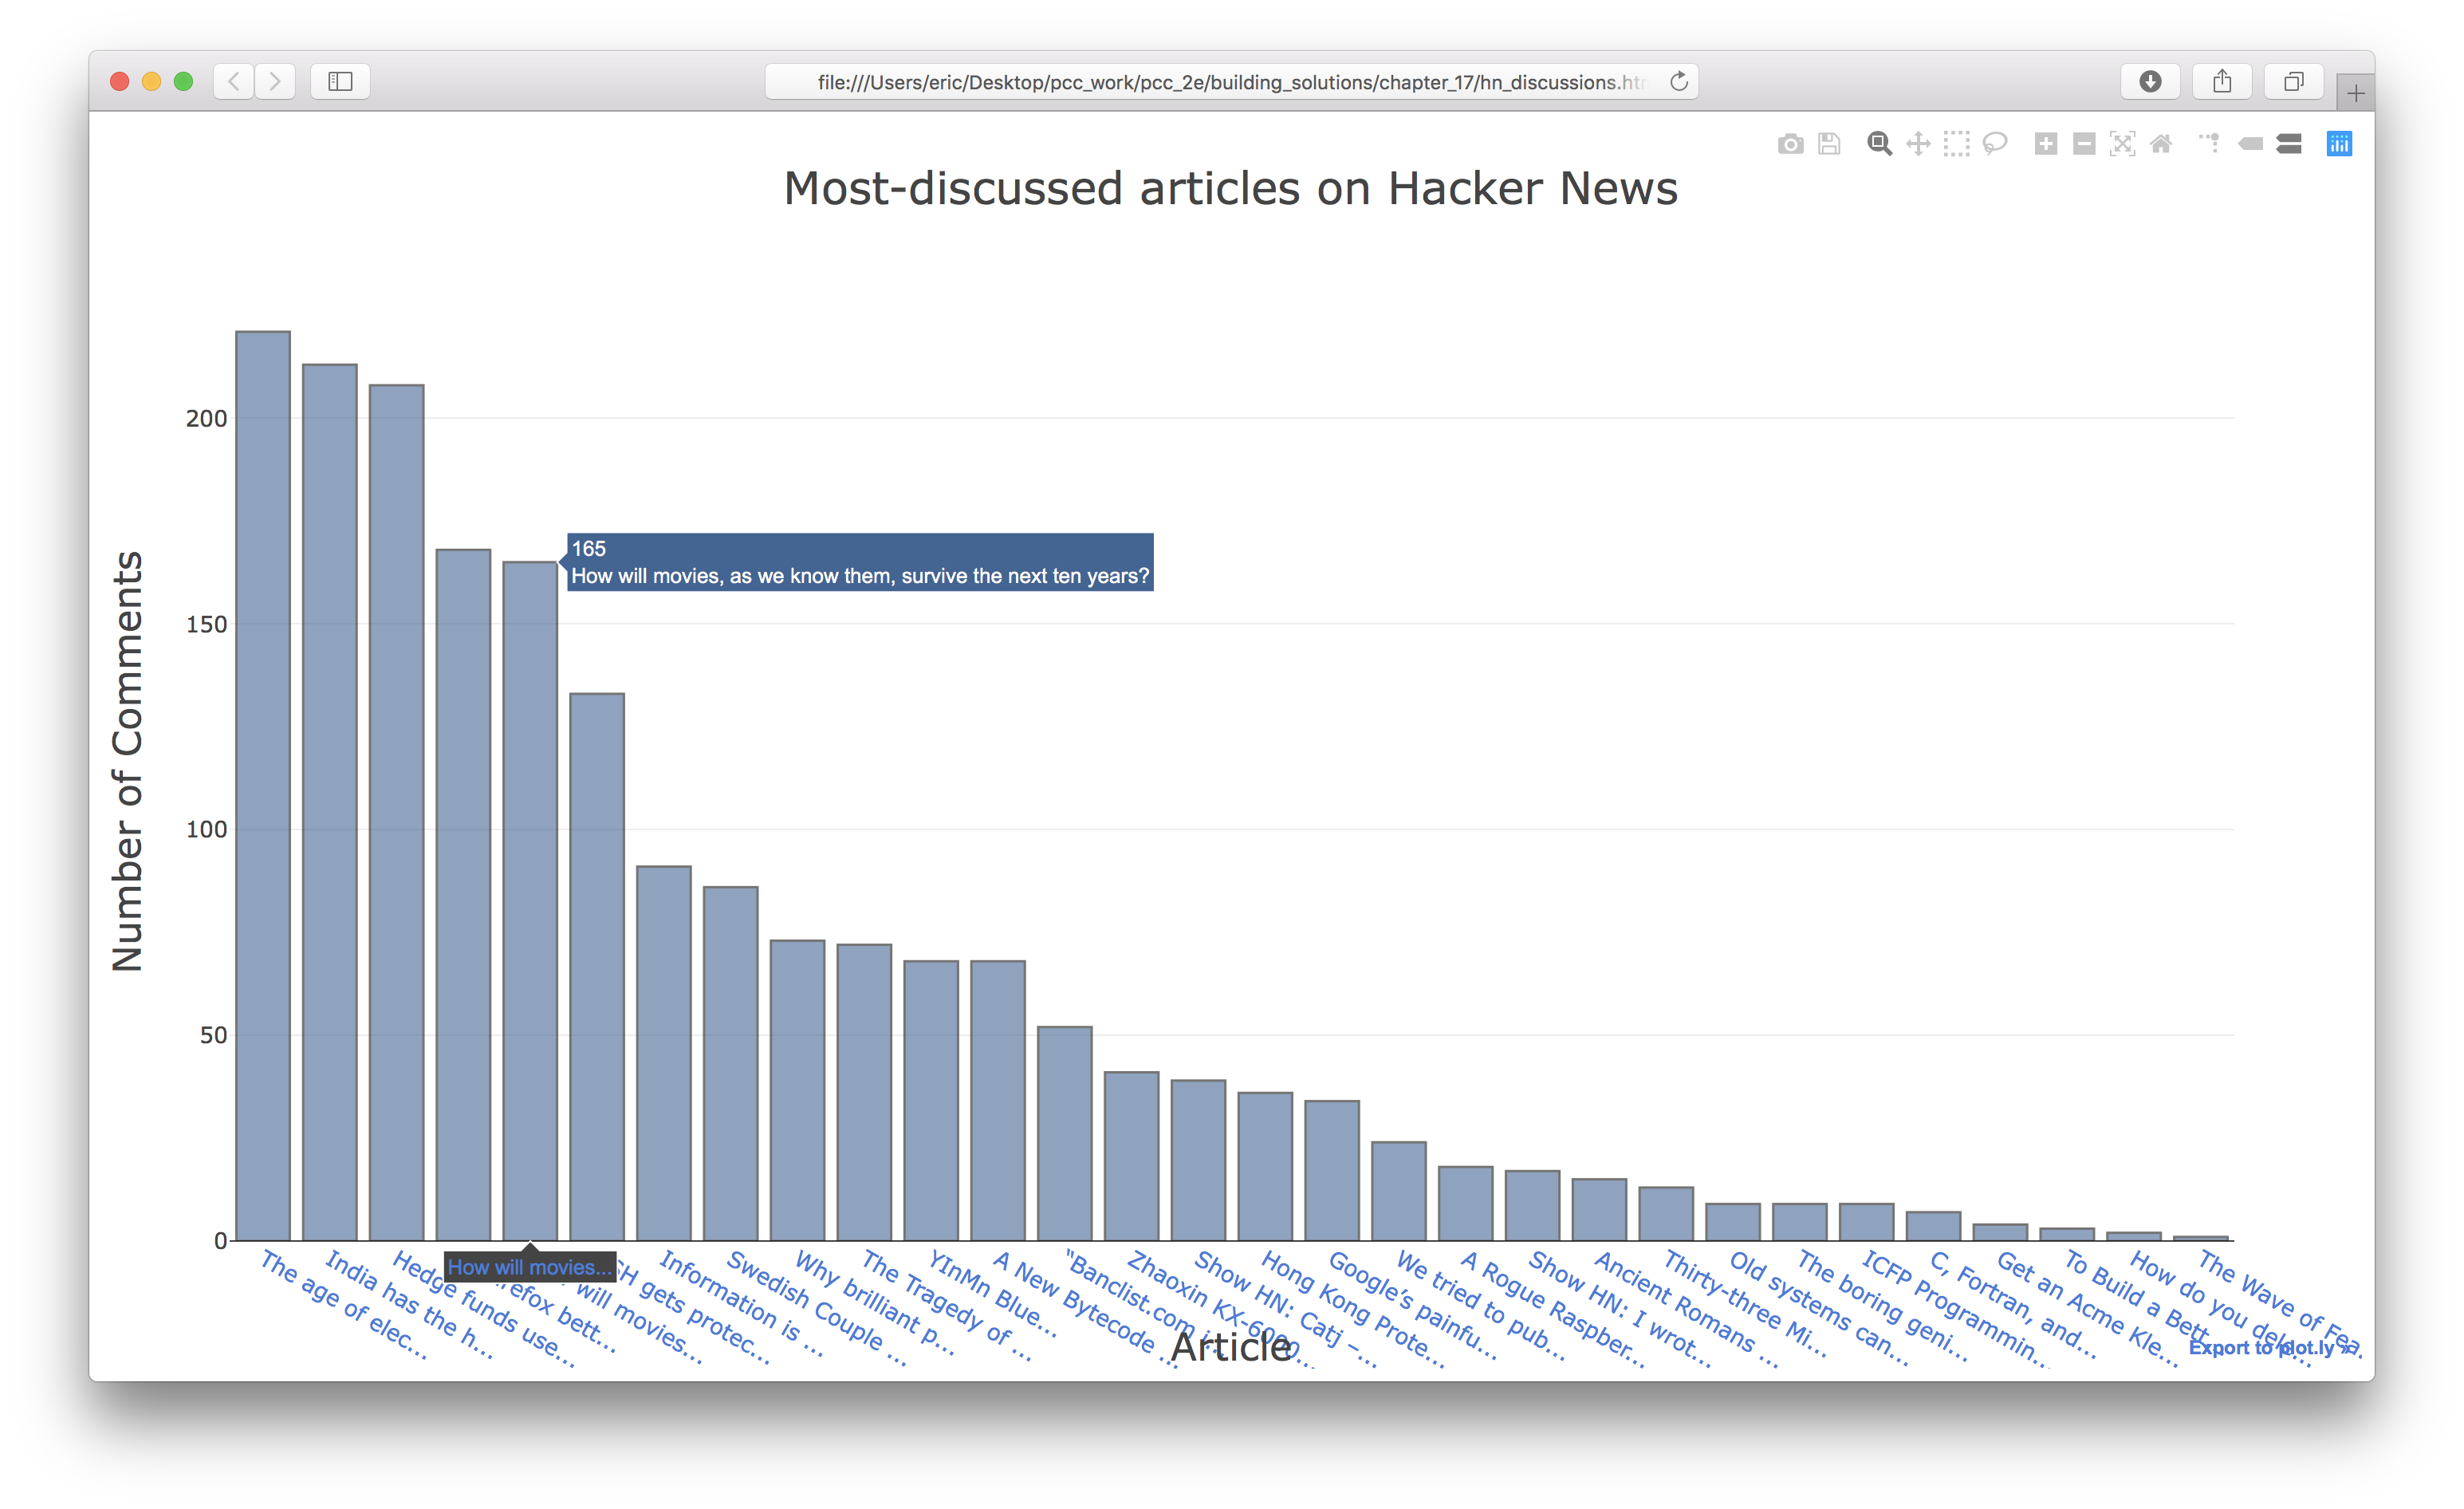 Most active discussions on Hacker News